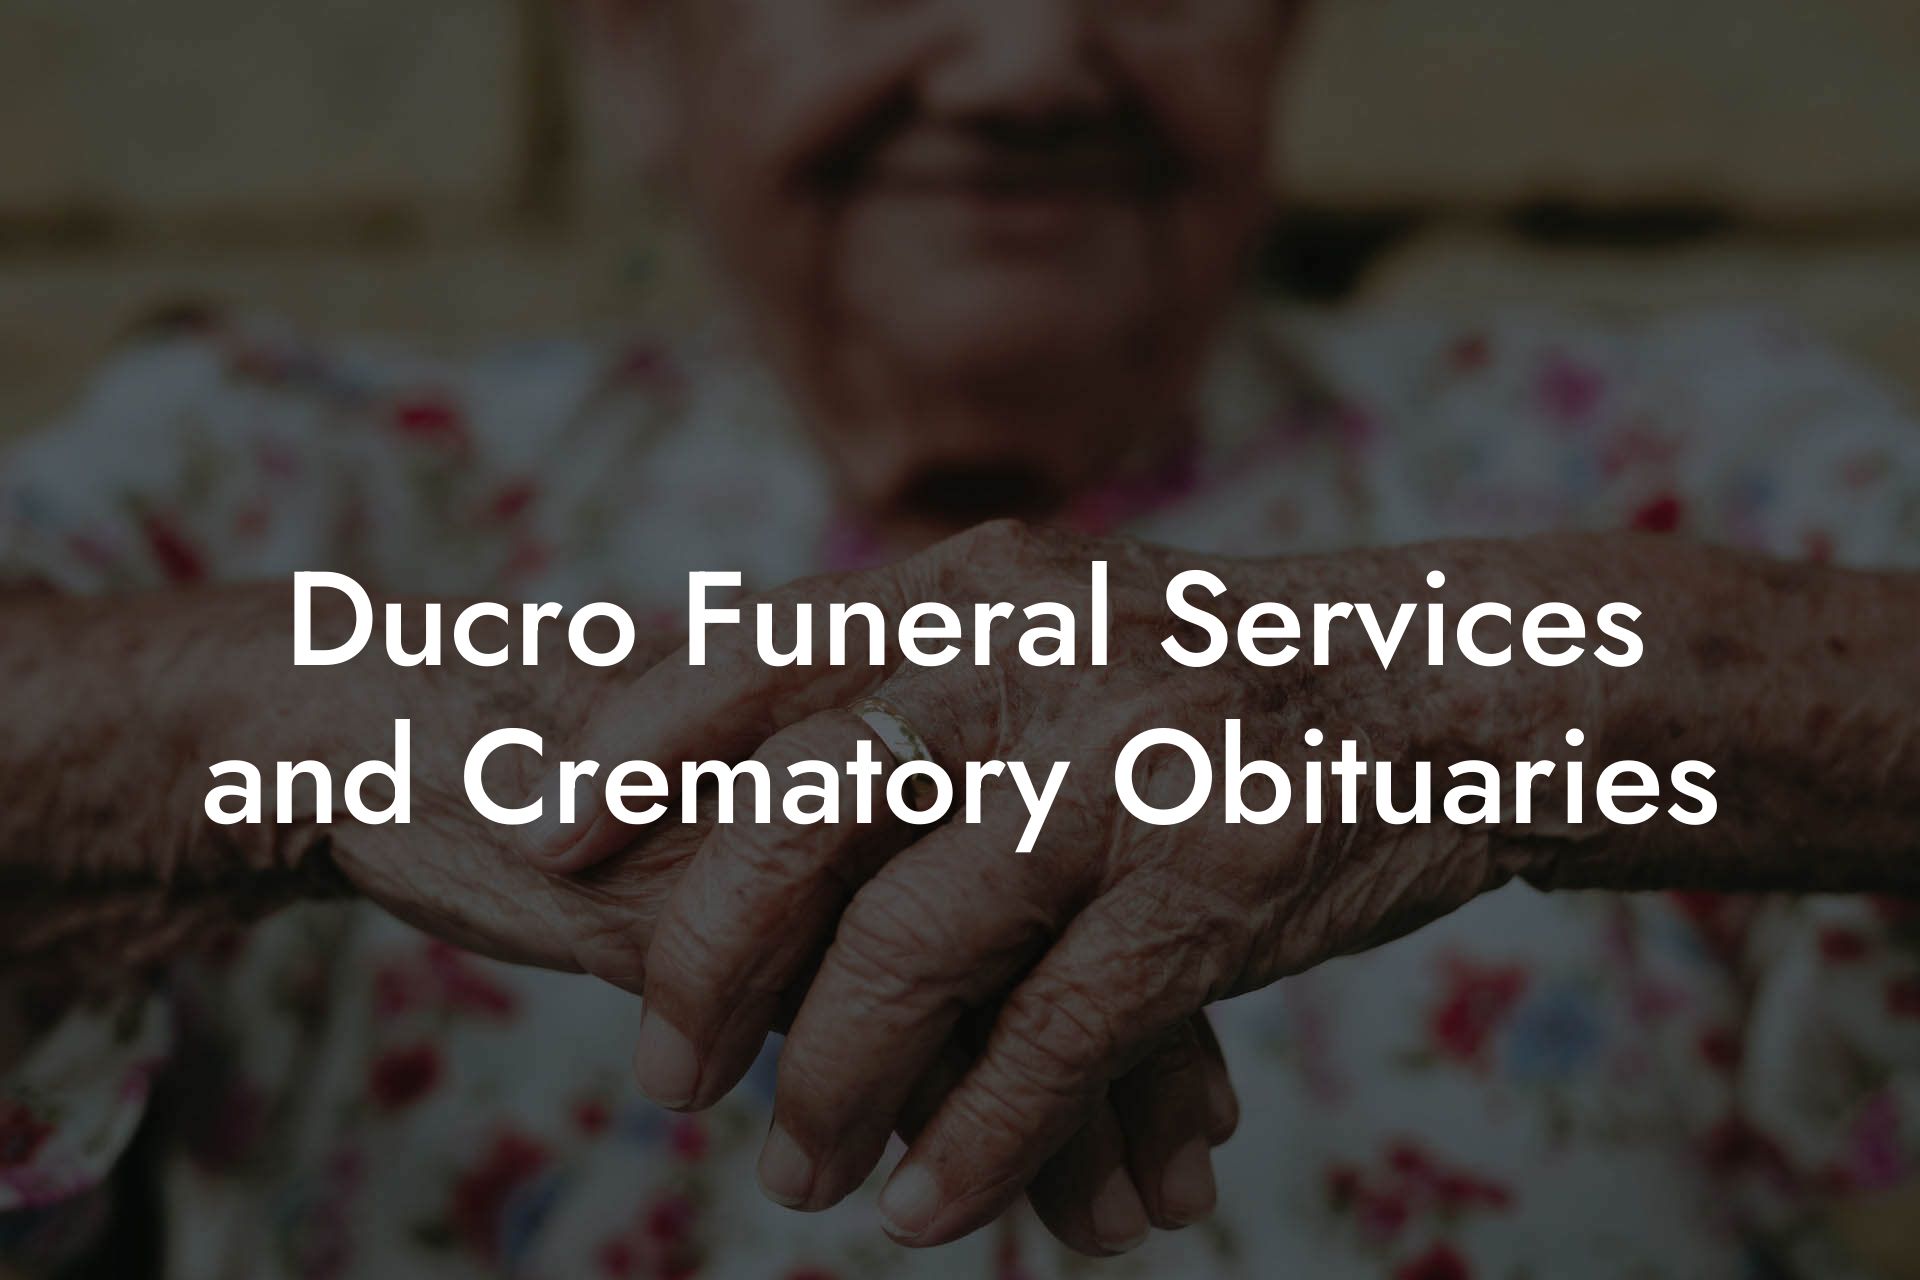 Ducro Funeral Services and Crematory Obituaries